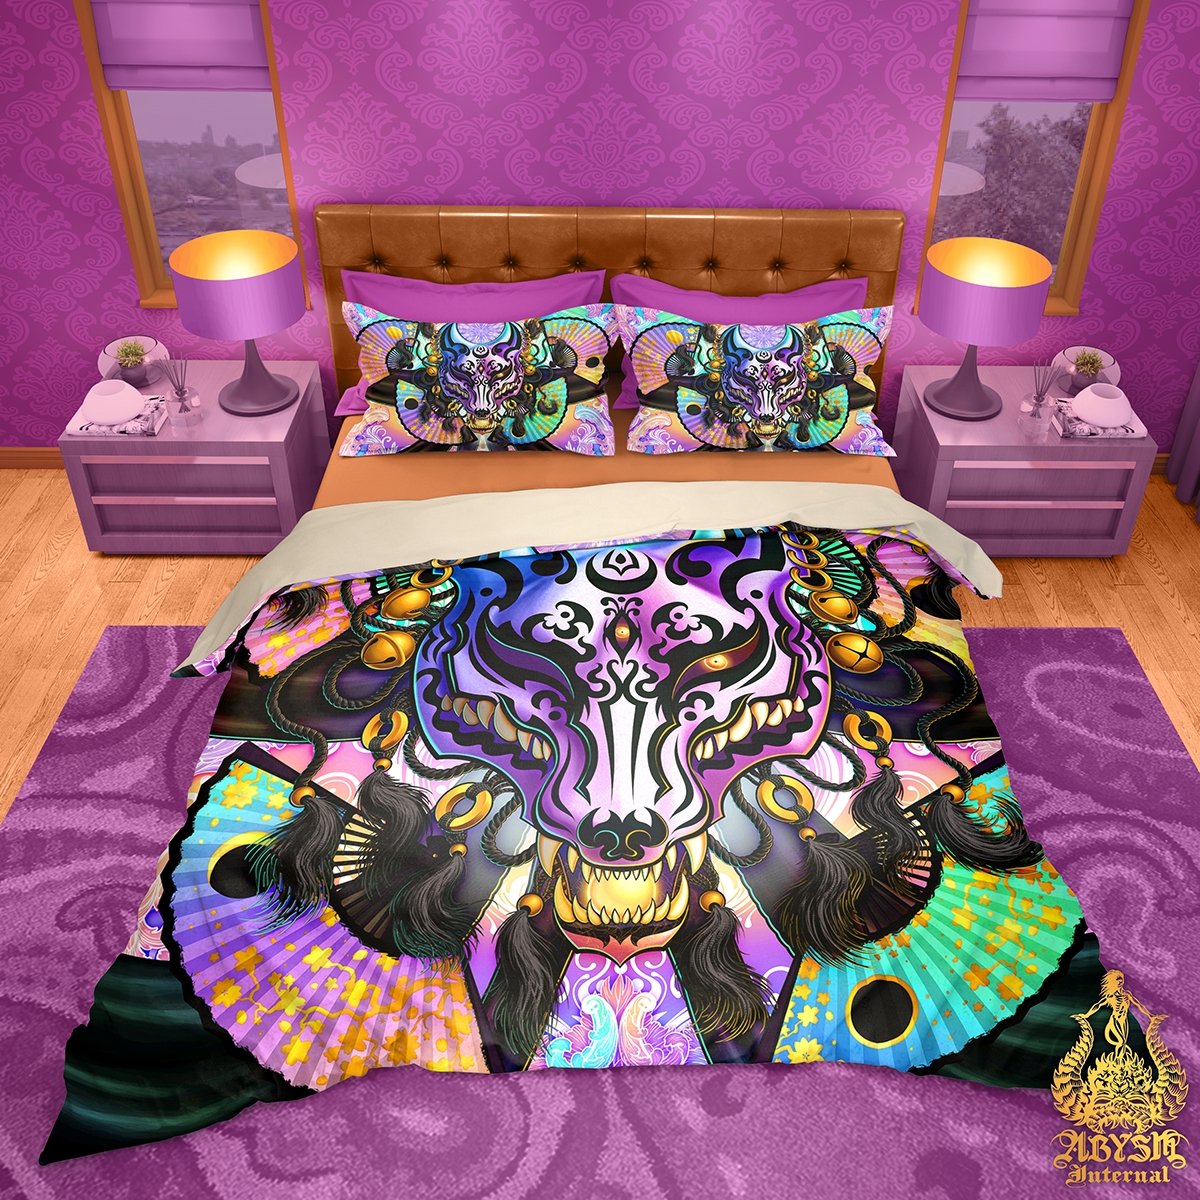 Pastel Punk Kitsune Mask Bedding Set, Comforter and Duvet, Fox Okami, Anime Art, Aesthetic Bed Cover, Kawaii Gamer Bedroom Decor, King, Queen and Twin Size - Black - Abysm Internal